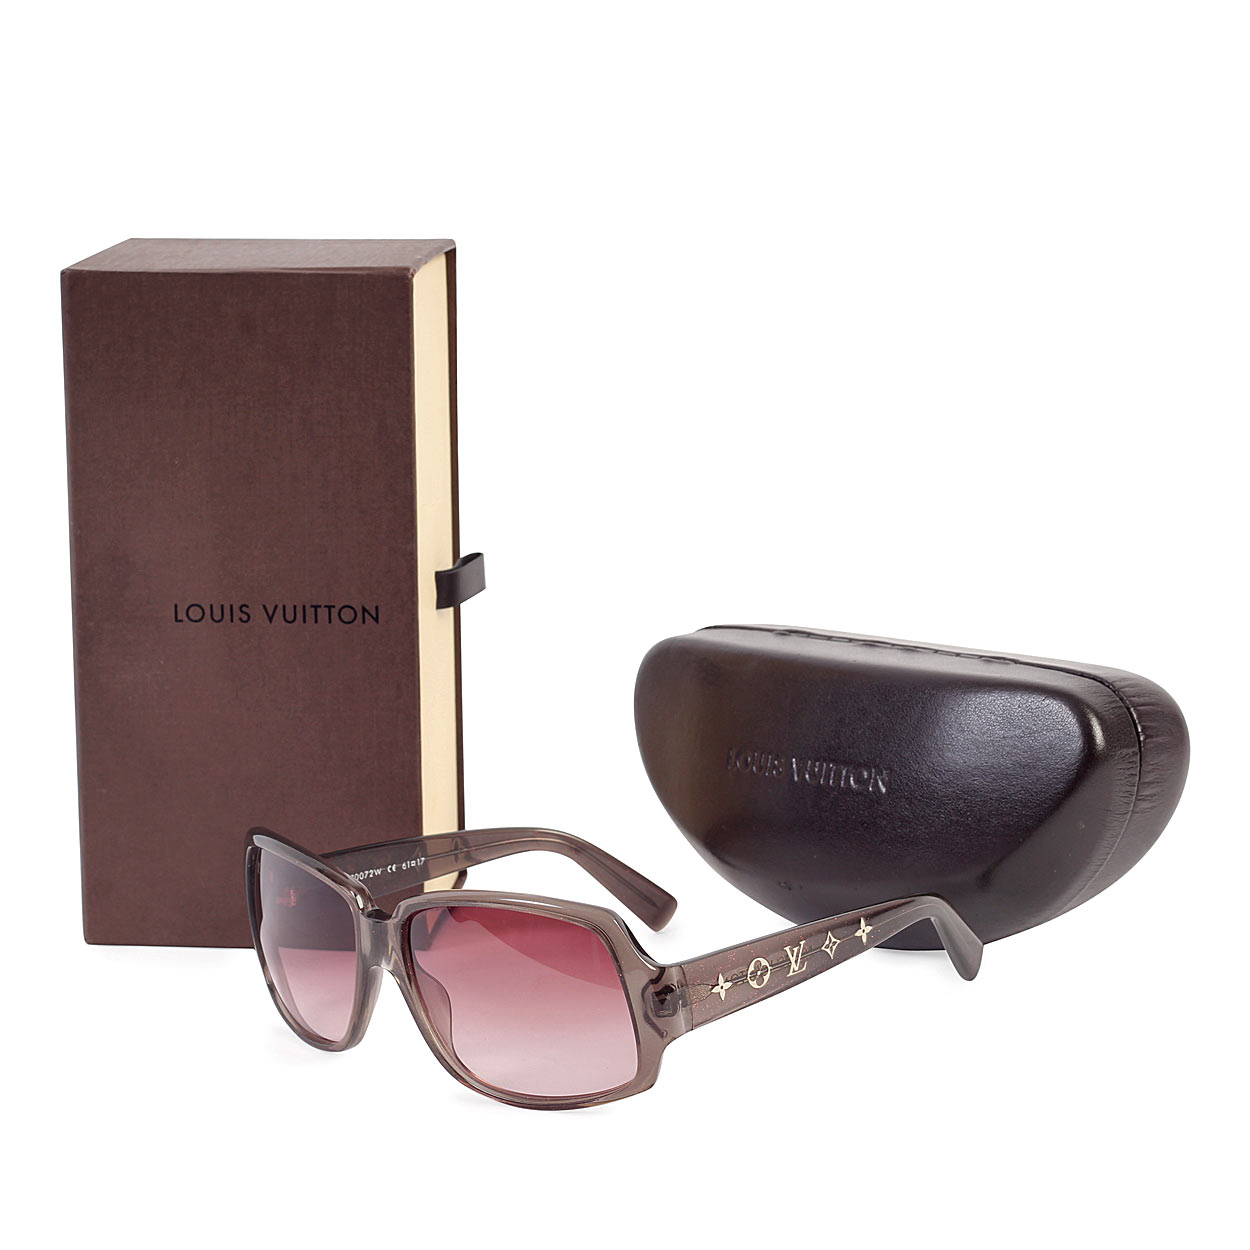 LOUIS VUITTON Obsession GM Sunglasses - NEW - Luxity